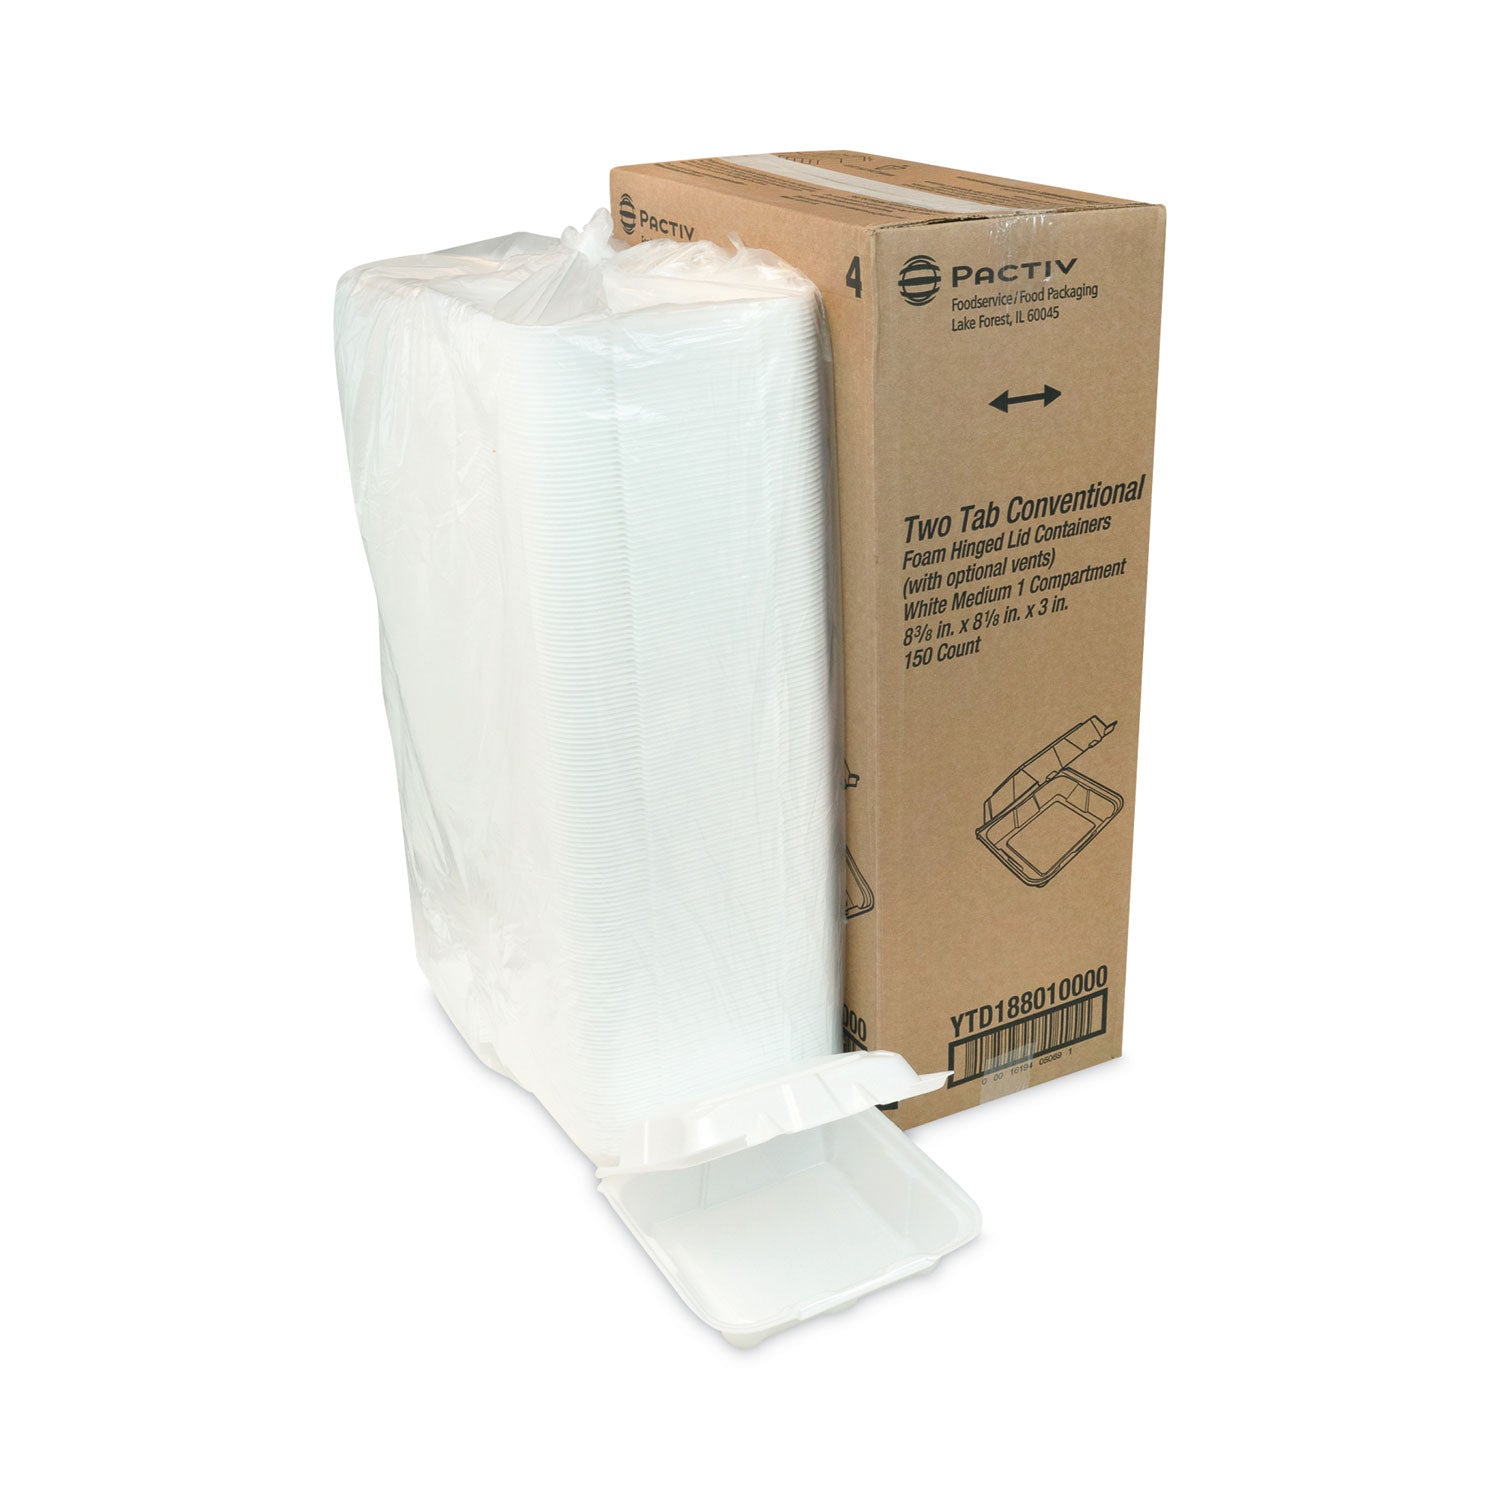 vented-foam-hinged-lid-container-dual-tab-lock-842-x-815-x-3-white-150-carton_pctytd188010000 - 5